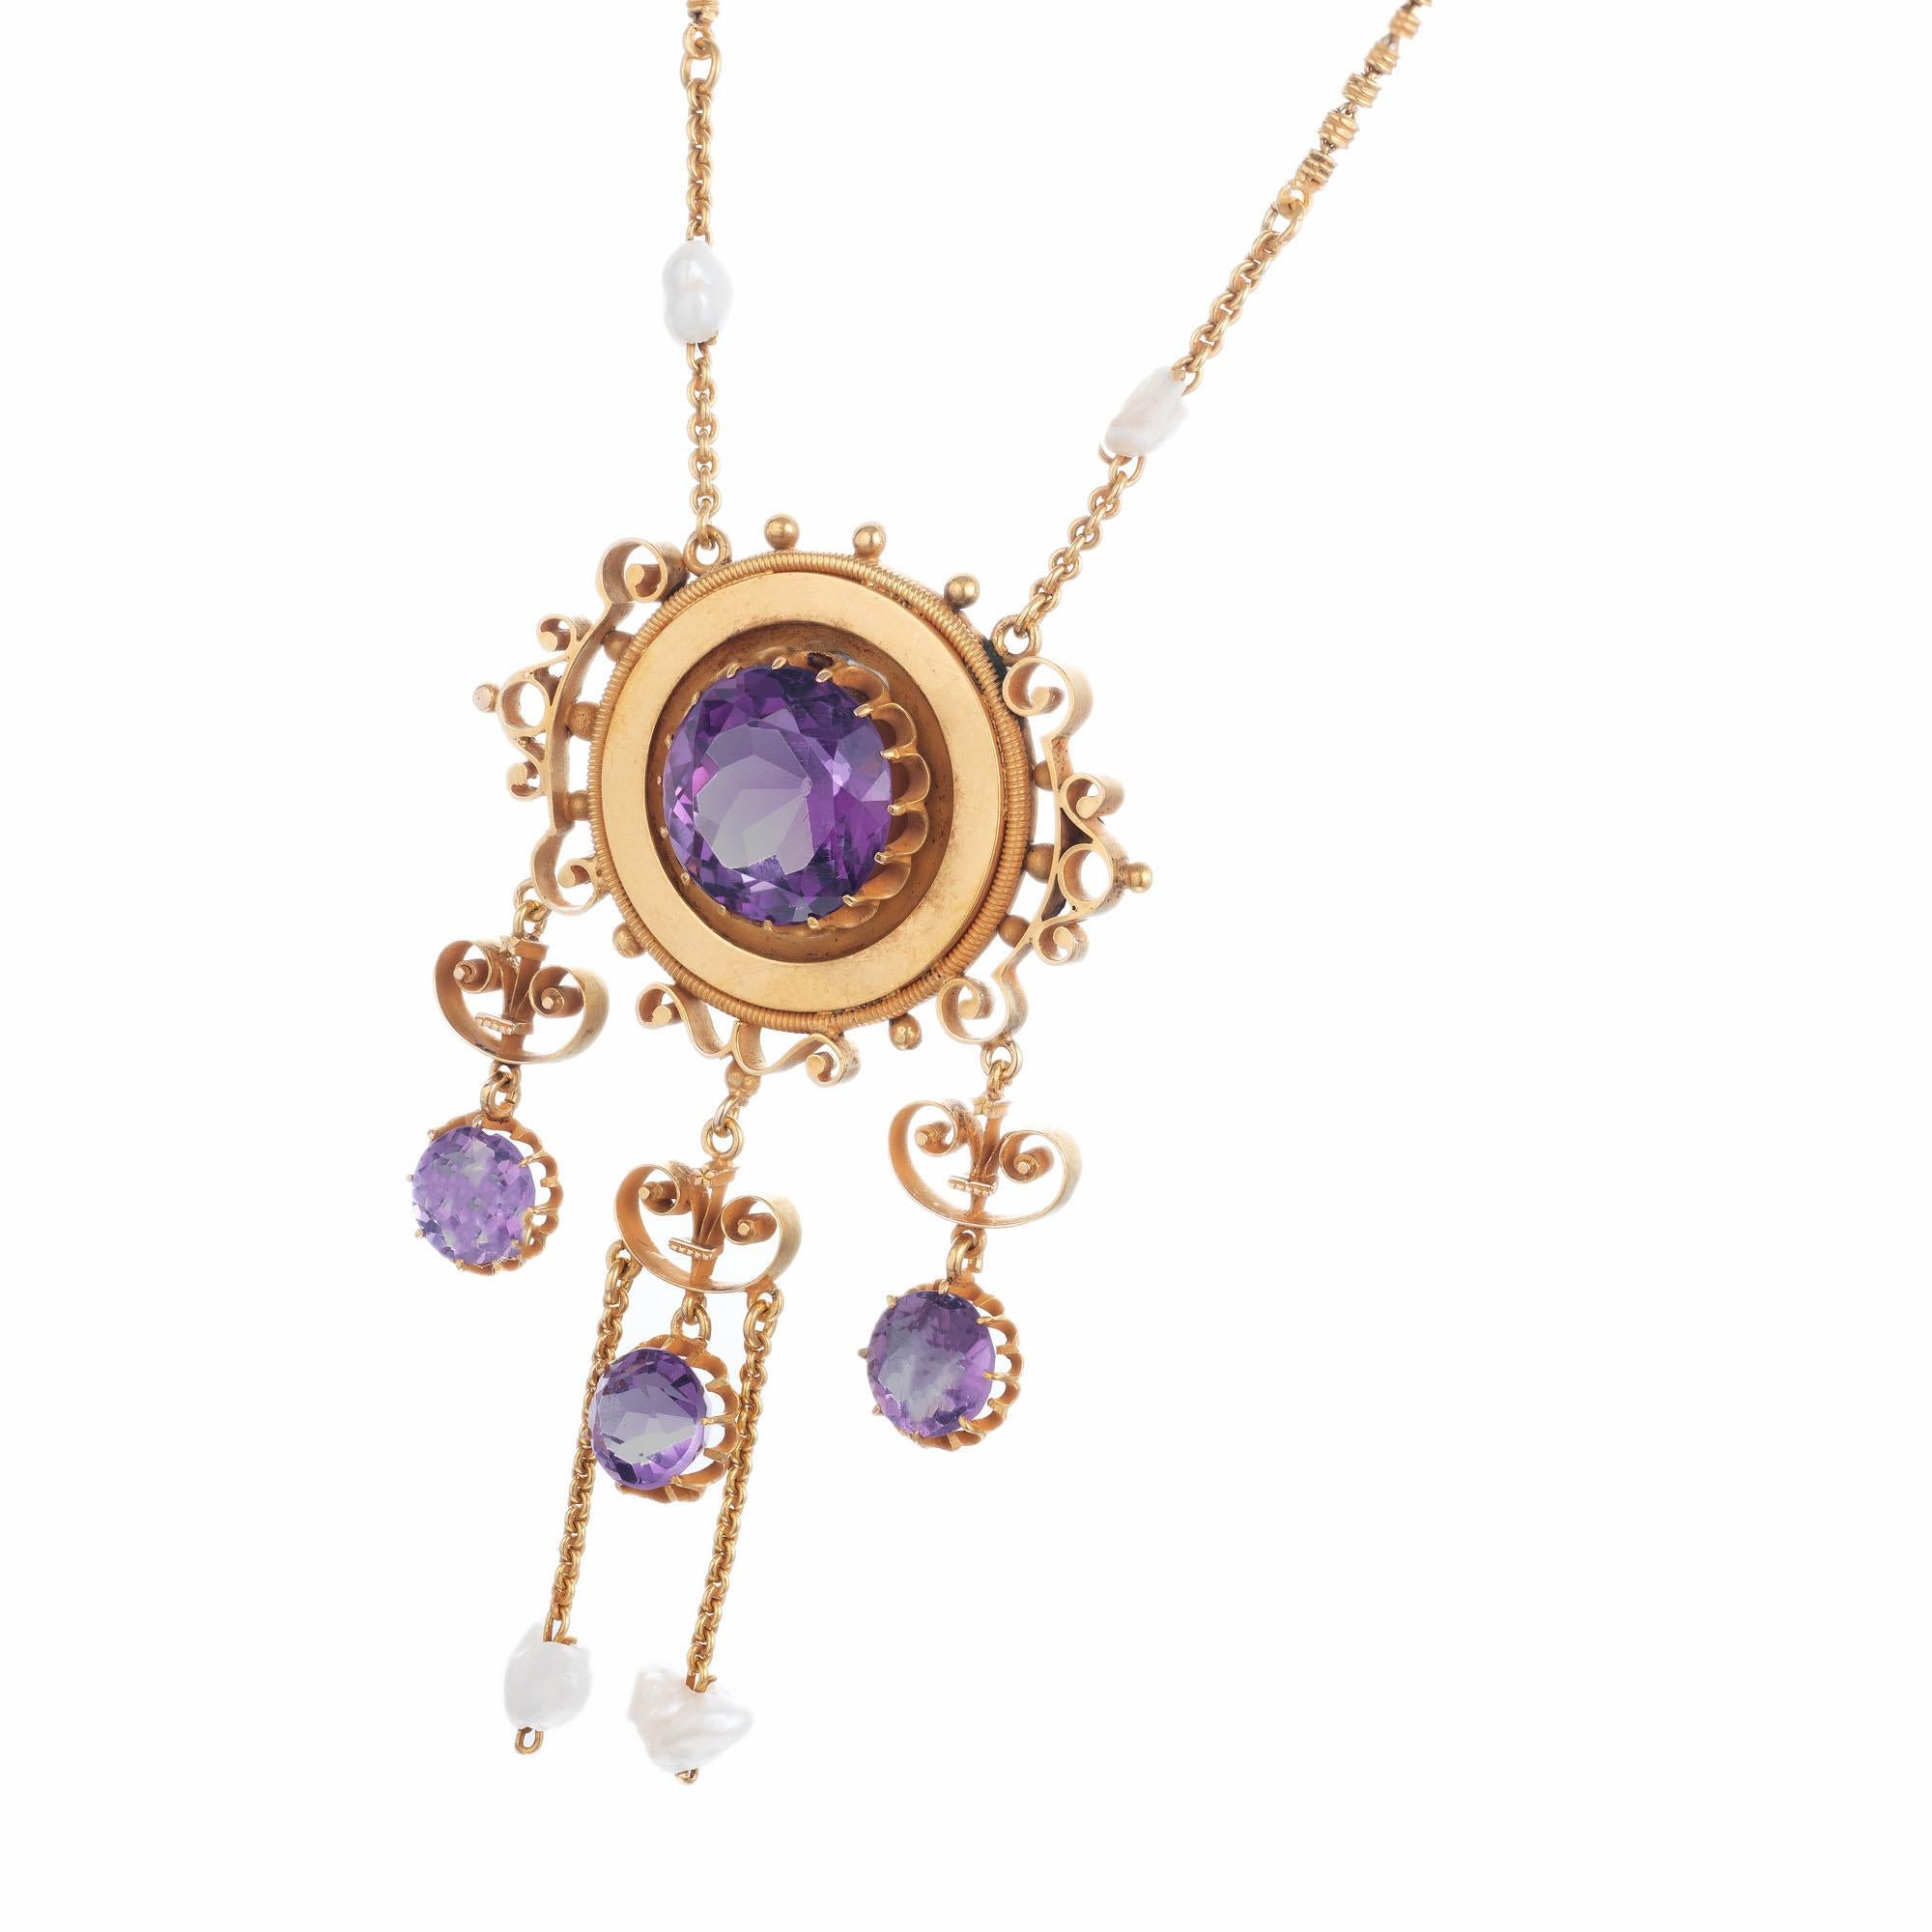 Original handmade Victorian pendant.  7.75 carat center round amethyst with 3 antique round cut Amethyst dangle below with scroll design hangers along with 2 natural fresh water pearls. Two more natural fresh pearls are above and above that is a